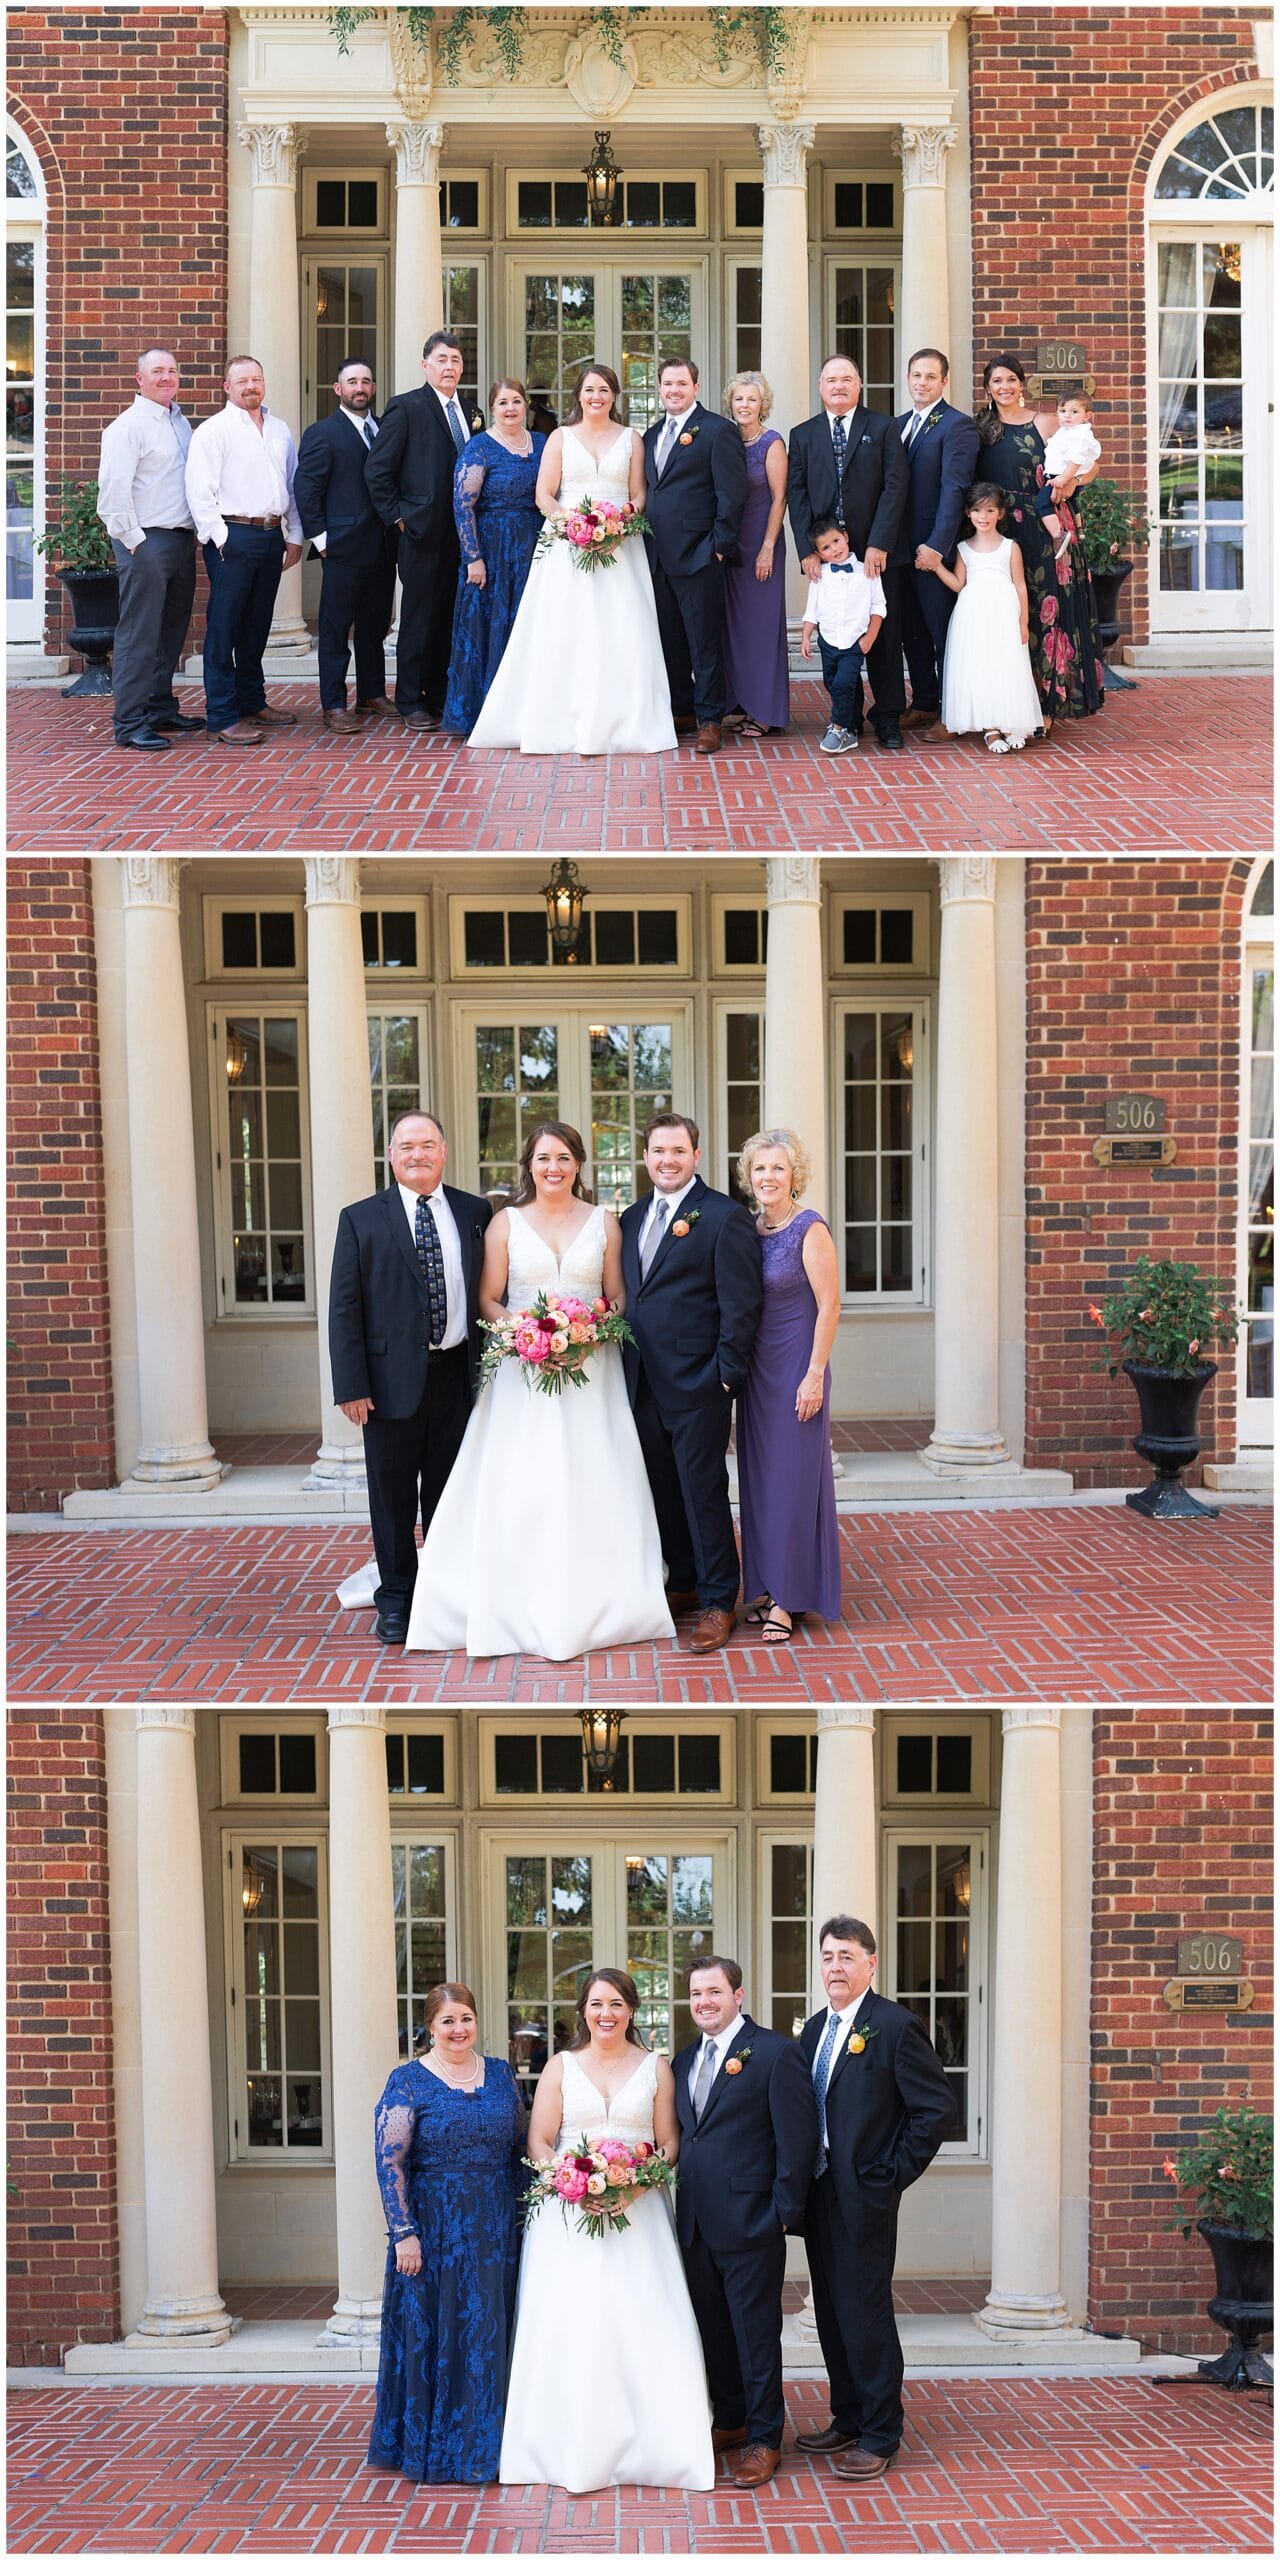 family portraits after wedding ceremony at Astin Mansion in Bryan Texas by Swish and Click Photography